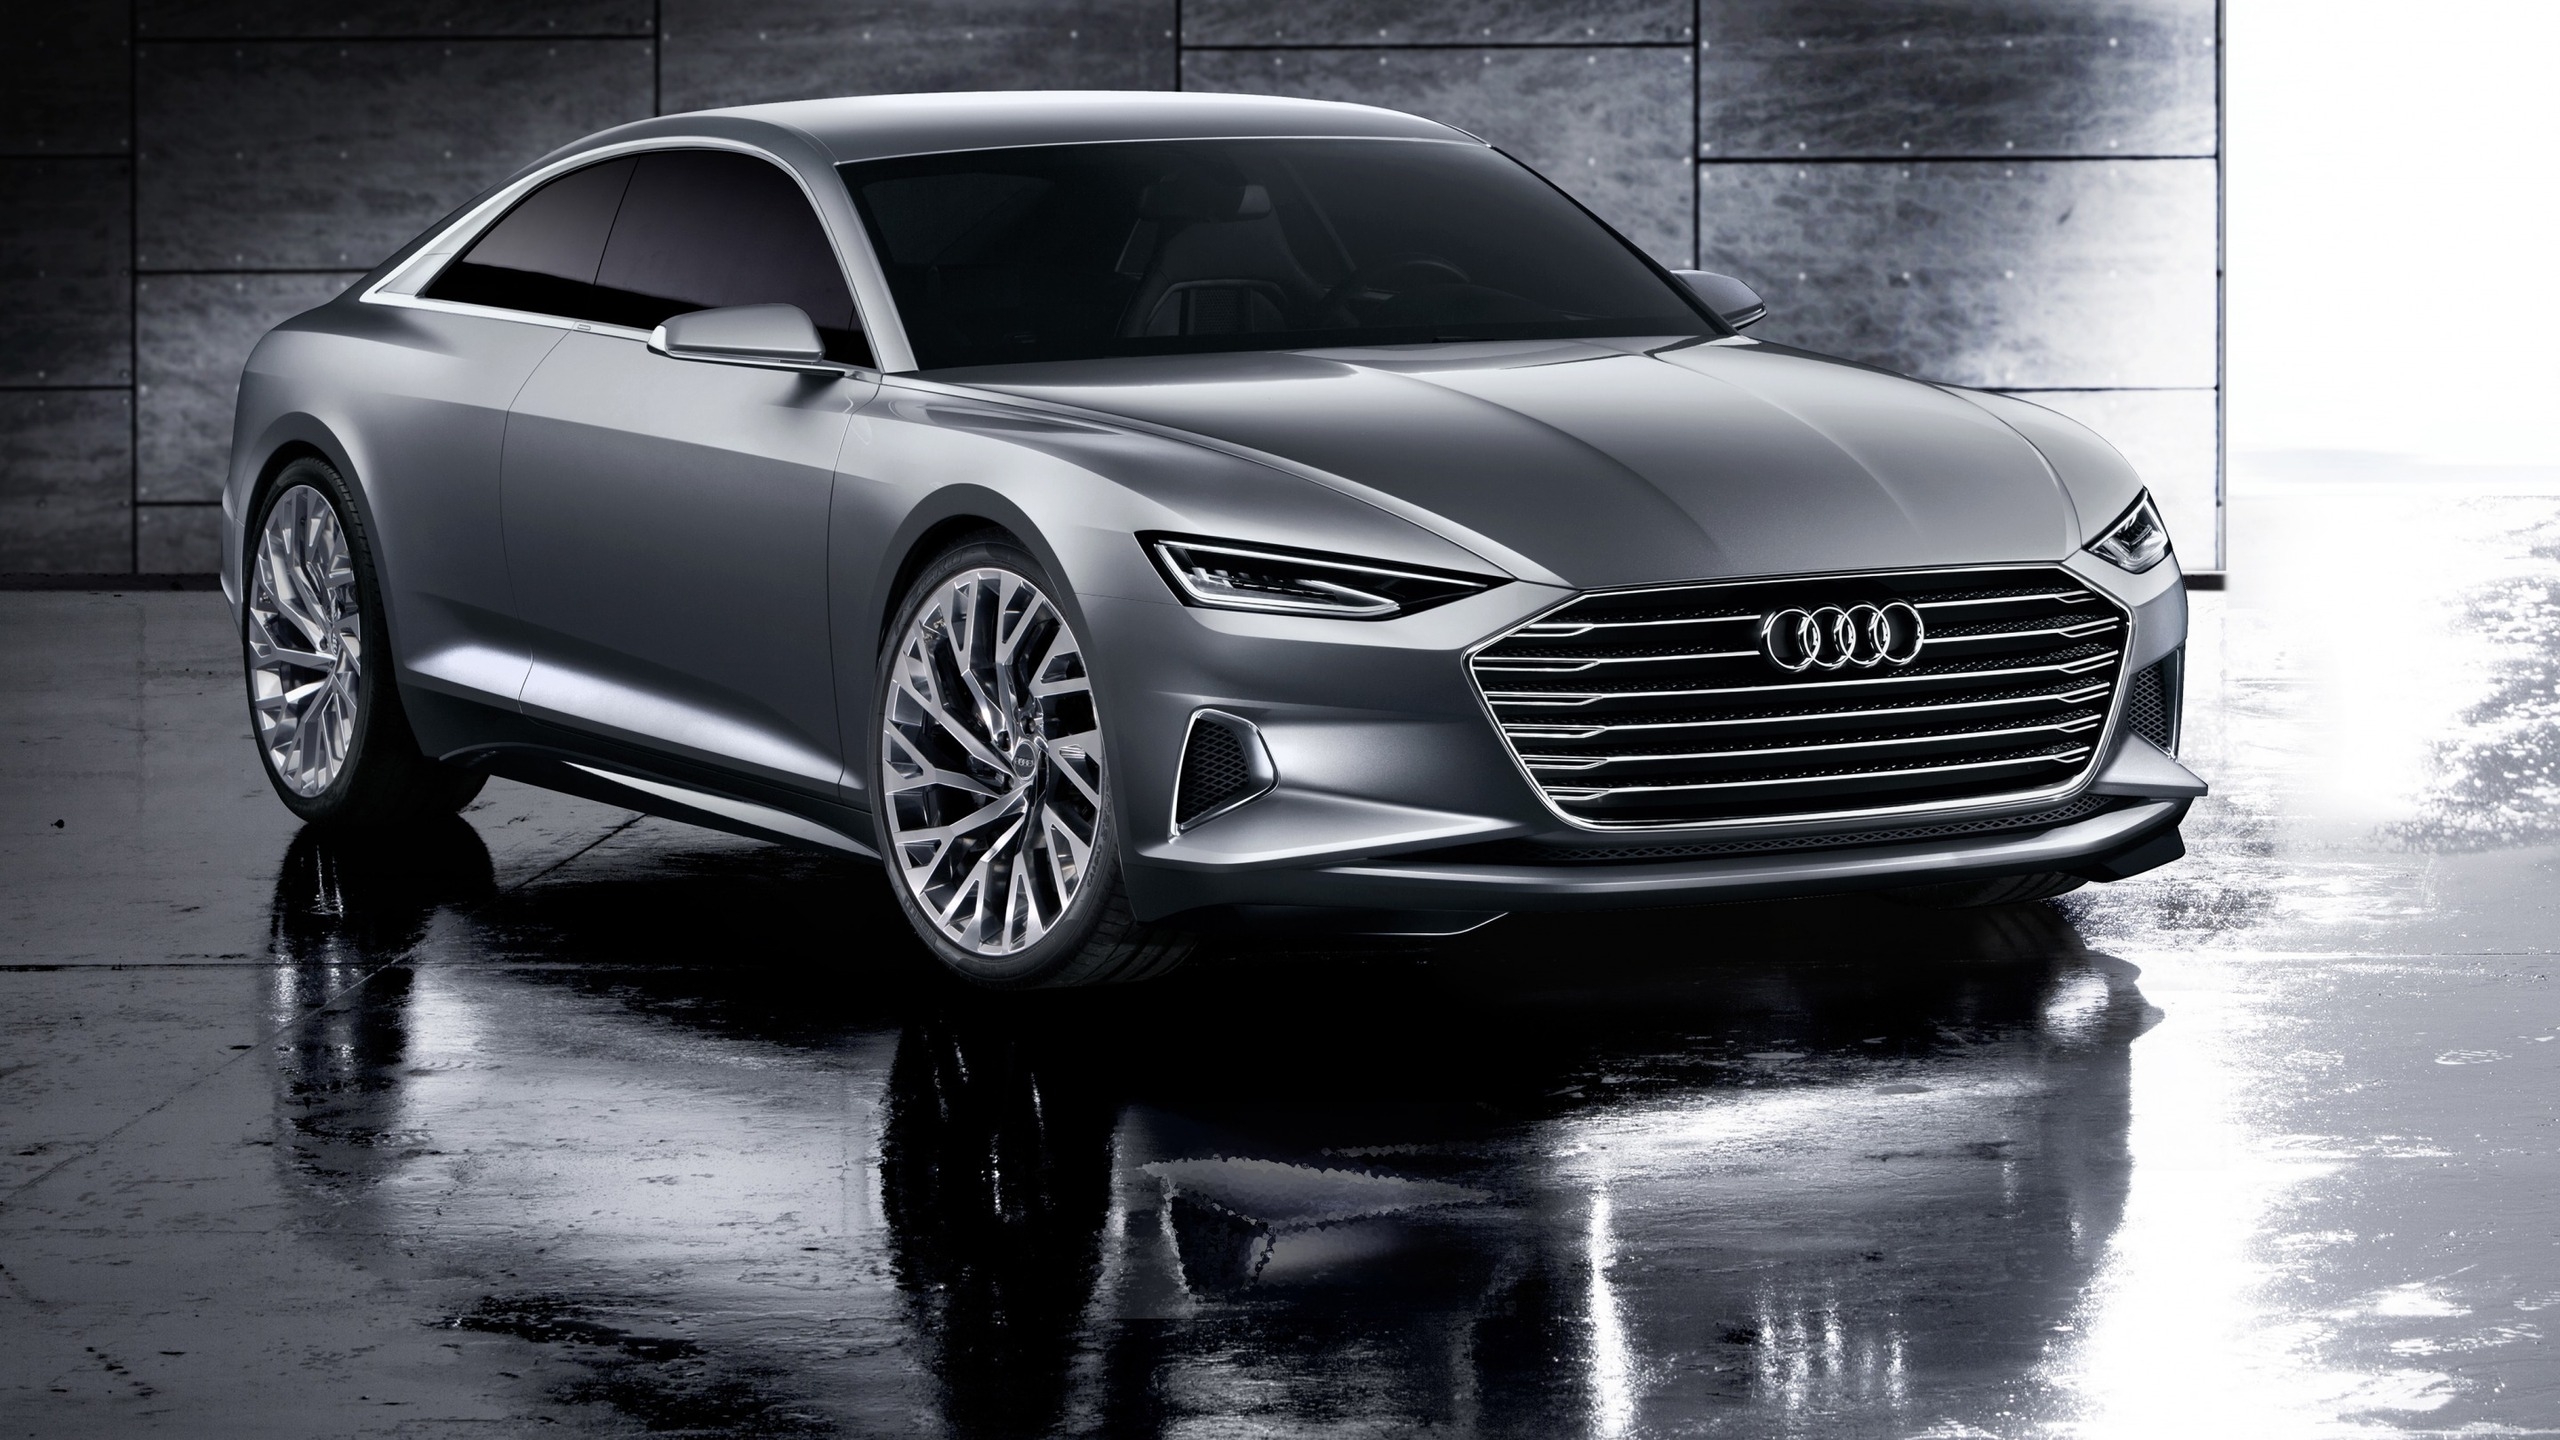 2014 Audi Prologue Concept  for 2560x1440 HDTV resolution